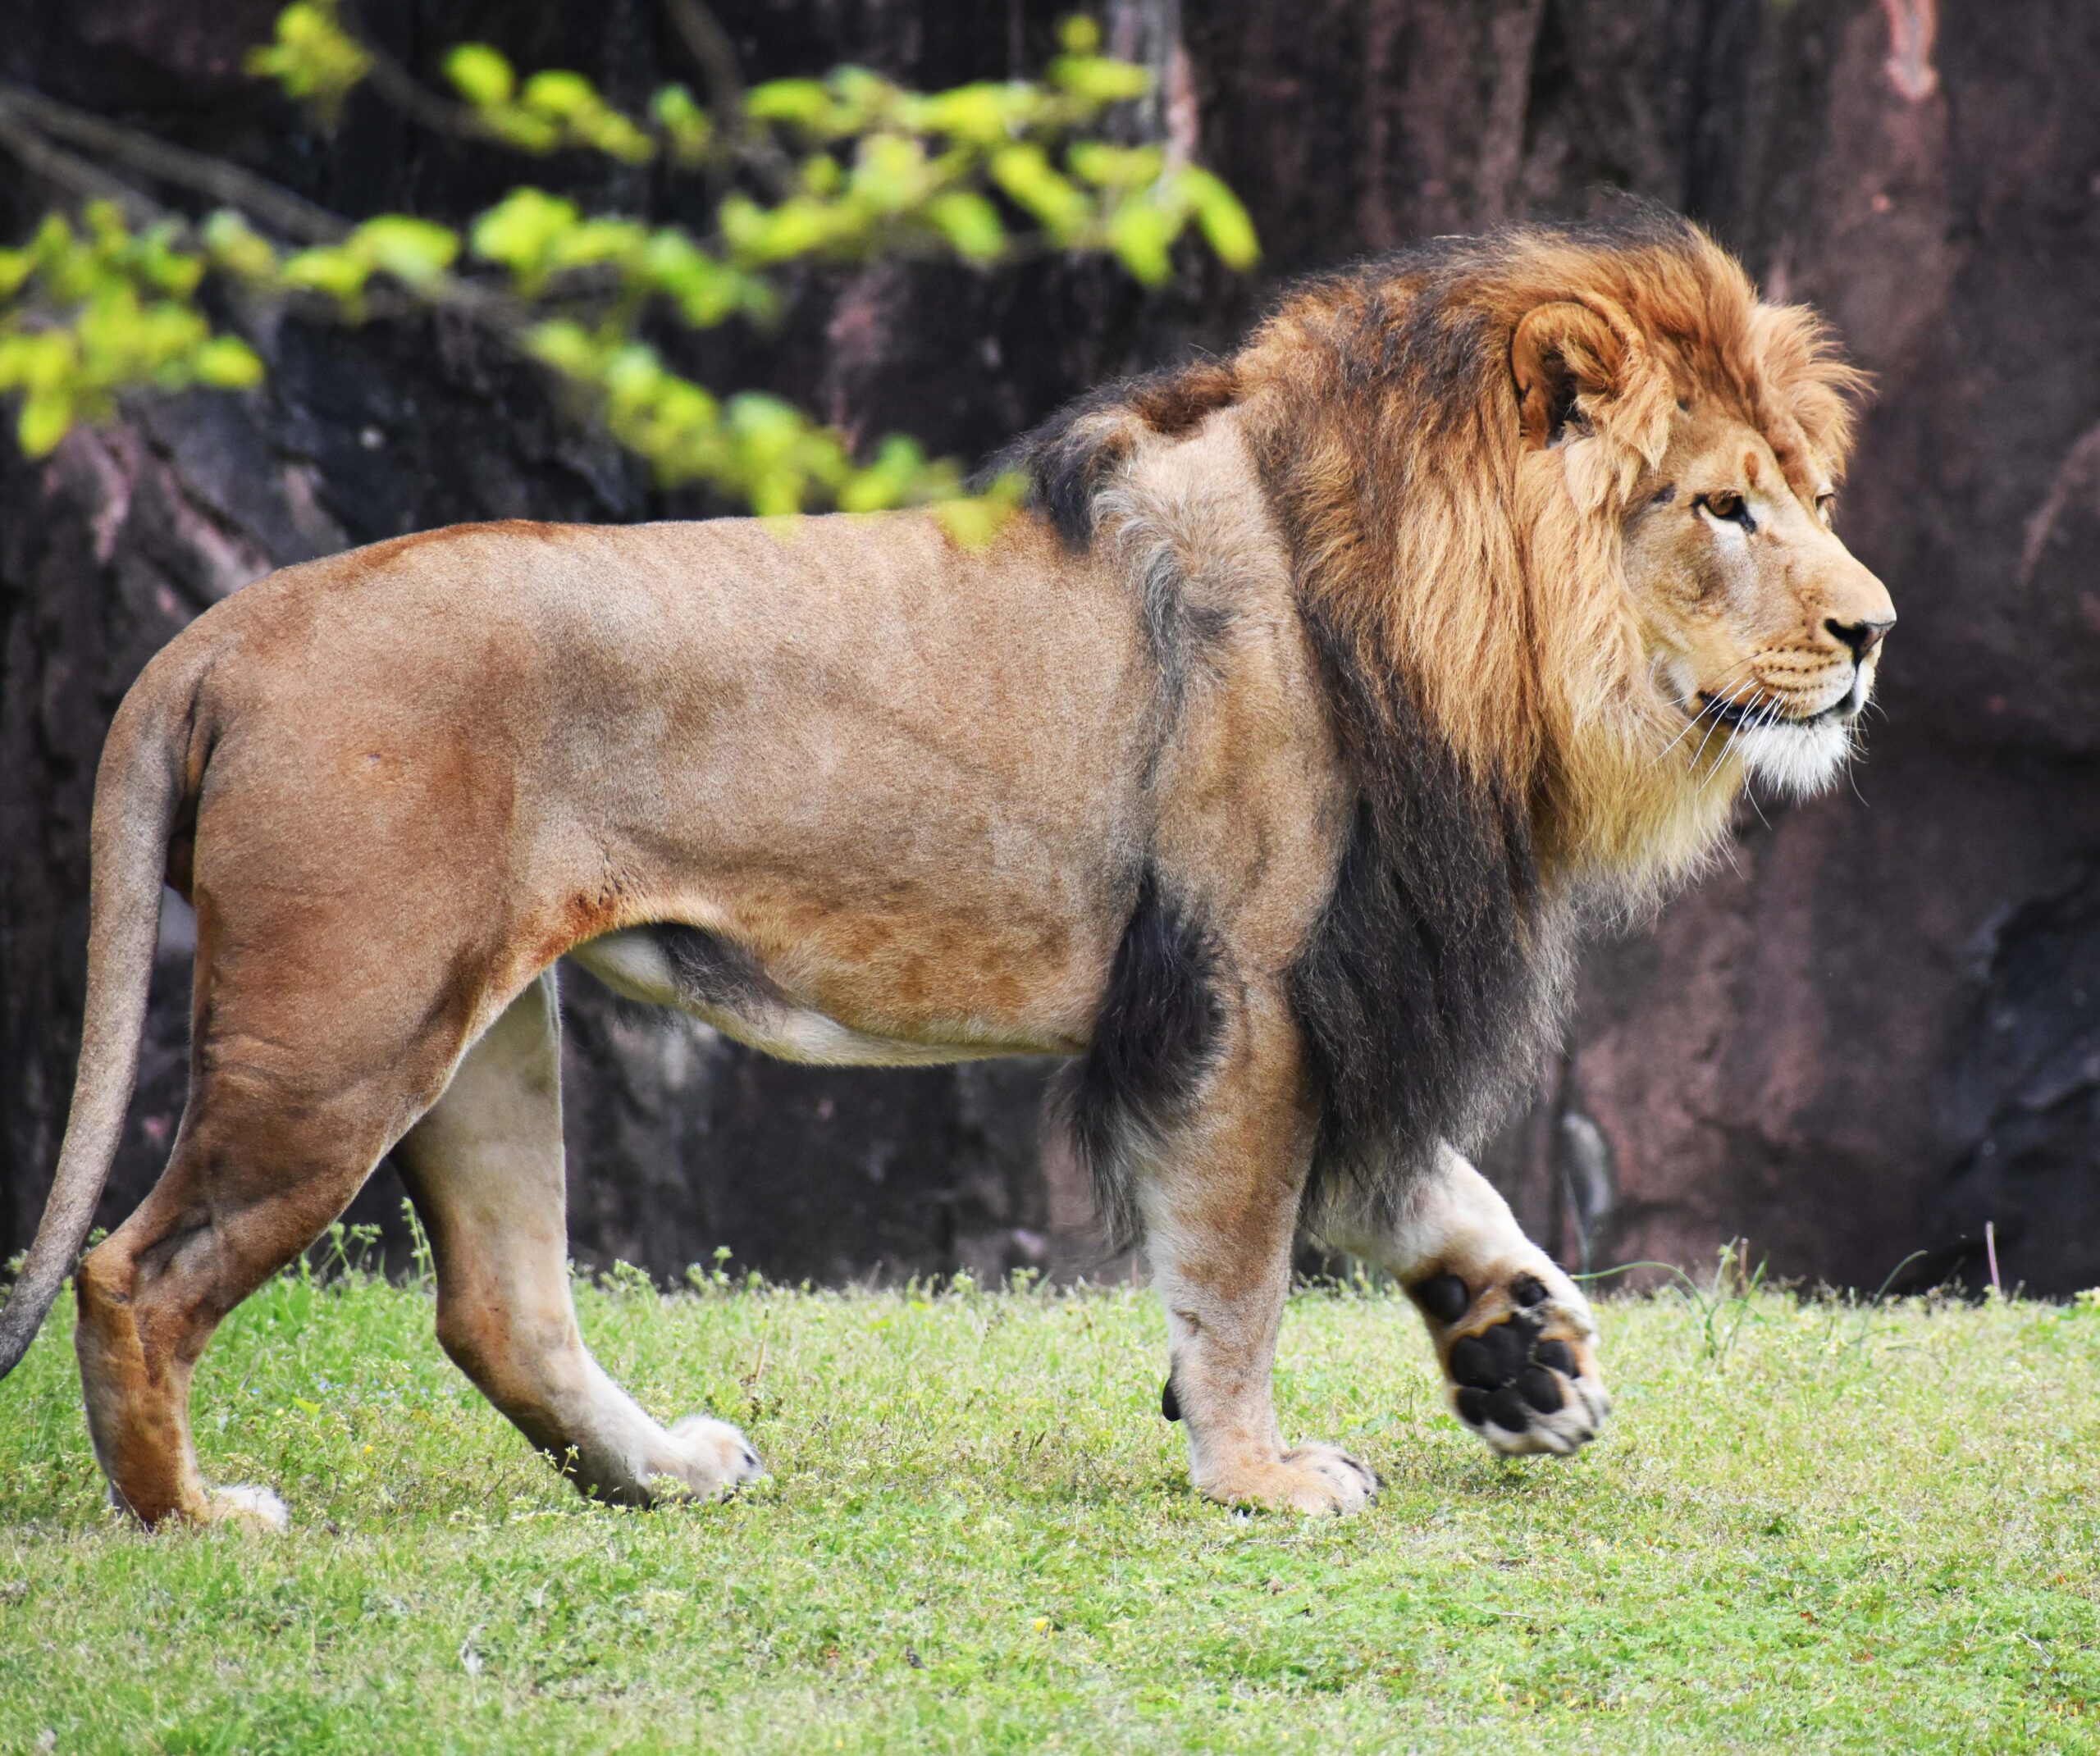 Zoo's New Male Lion Explores Habitat for the First Time - Virginia Zoo